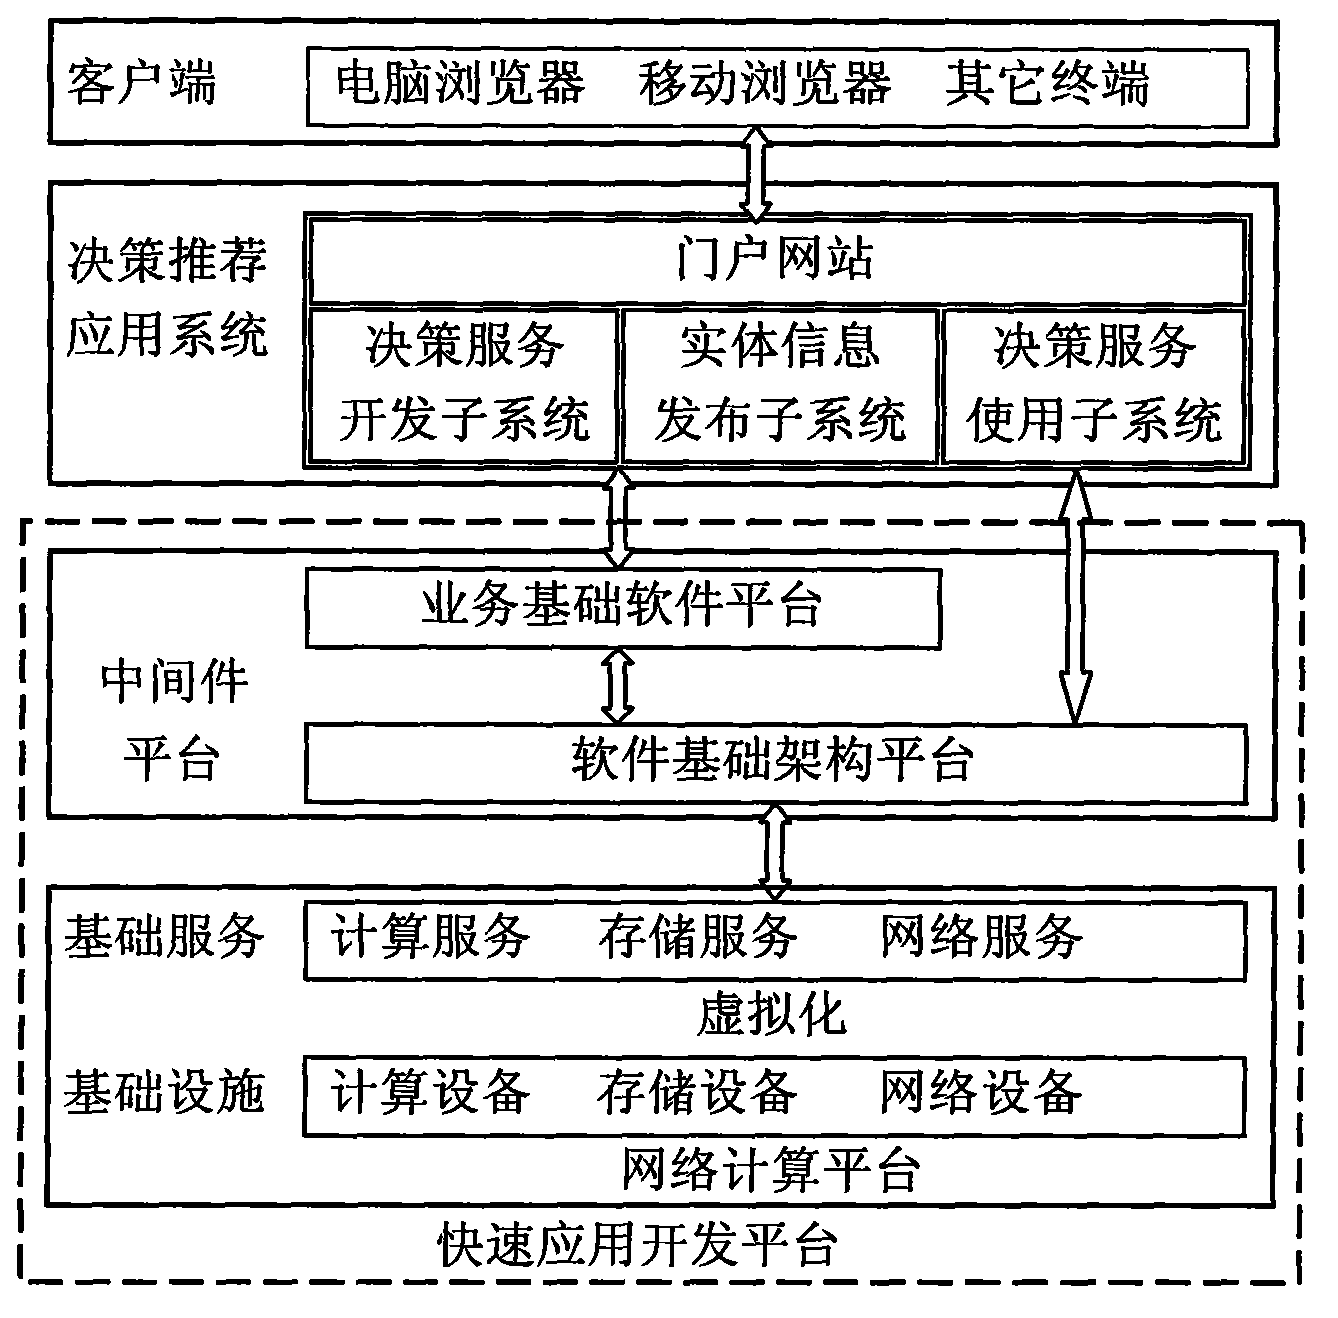 Intelligent decision-making and entity recommending union system based on internet and work flow